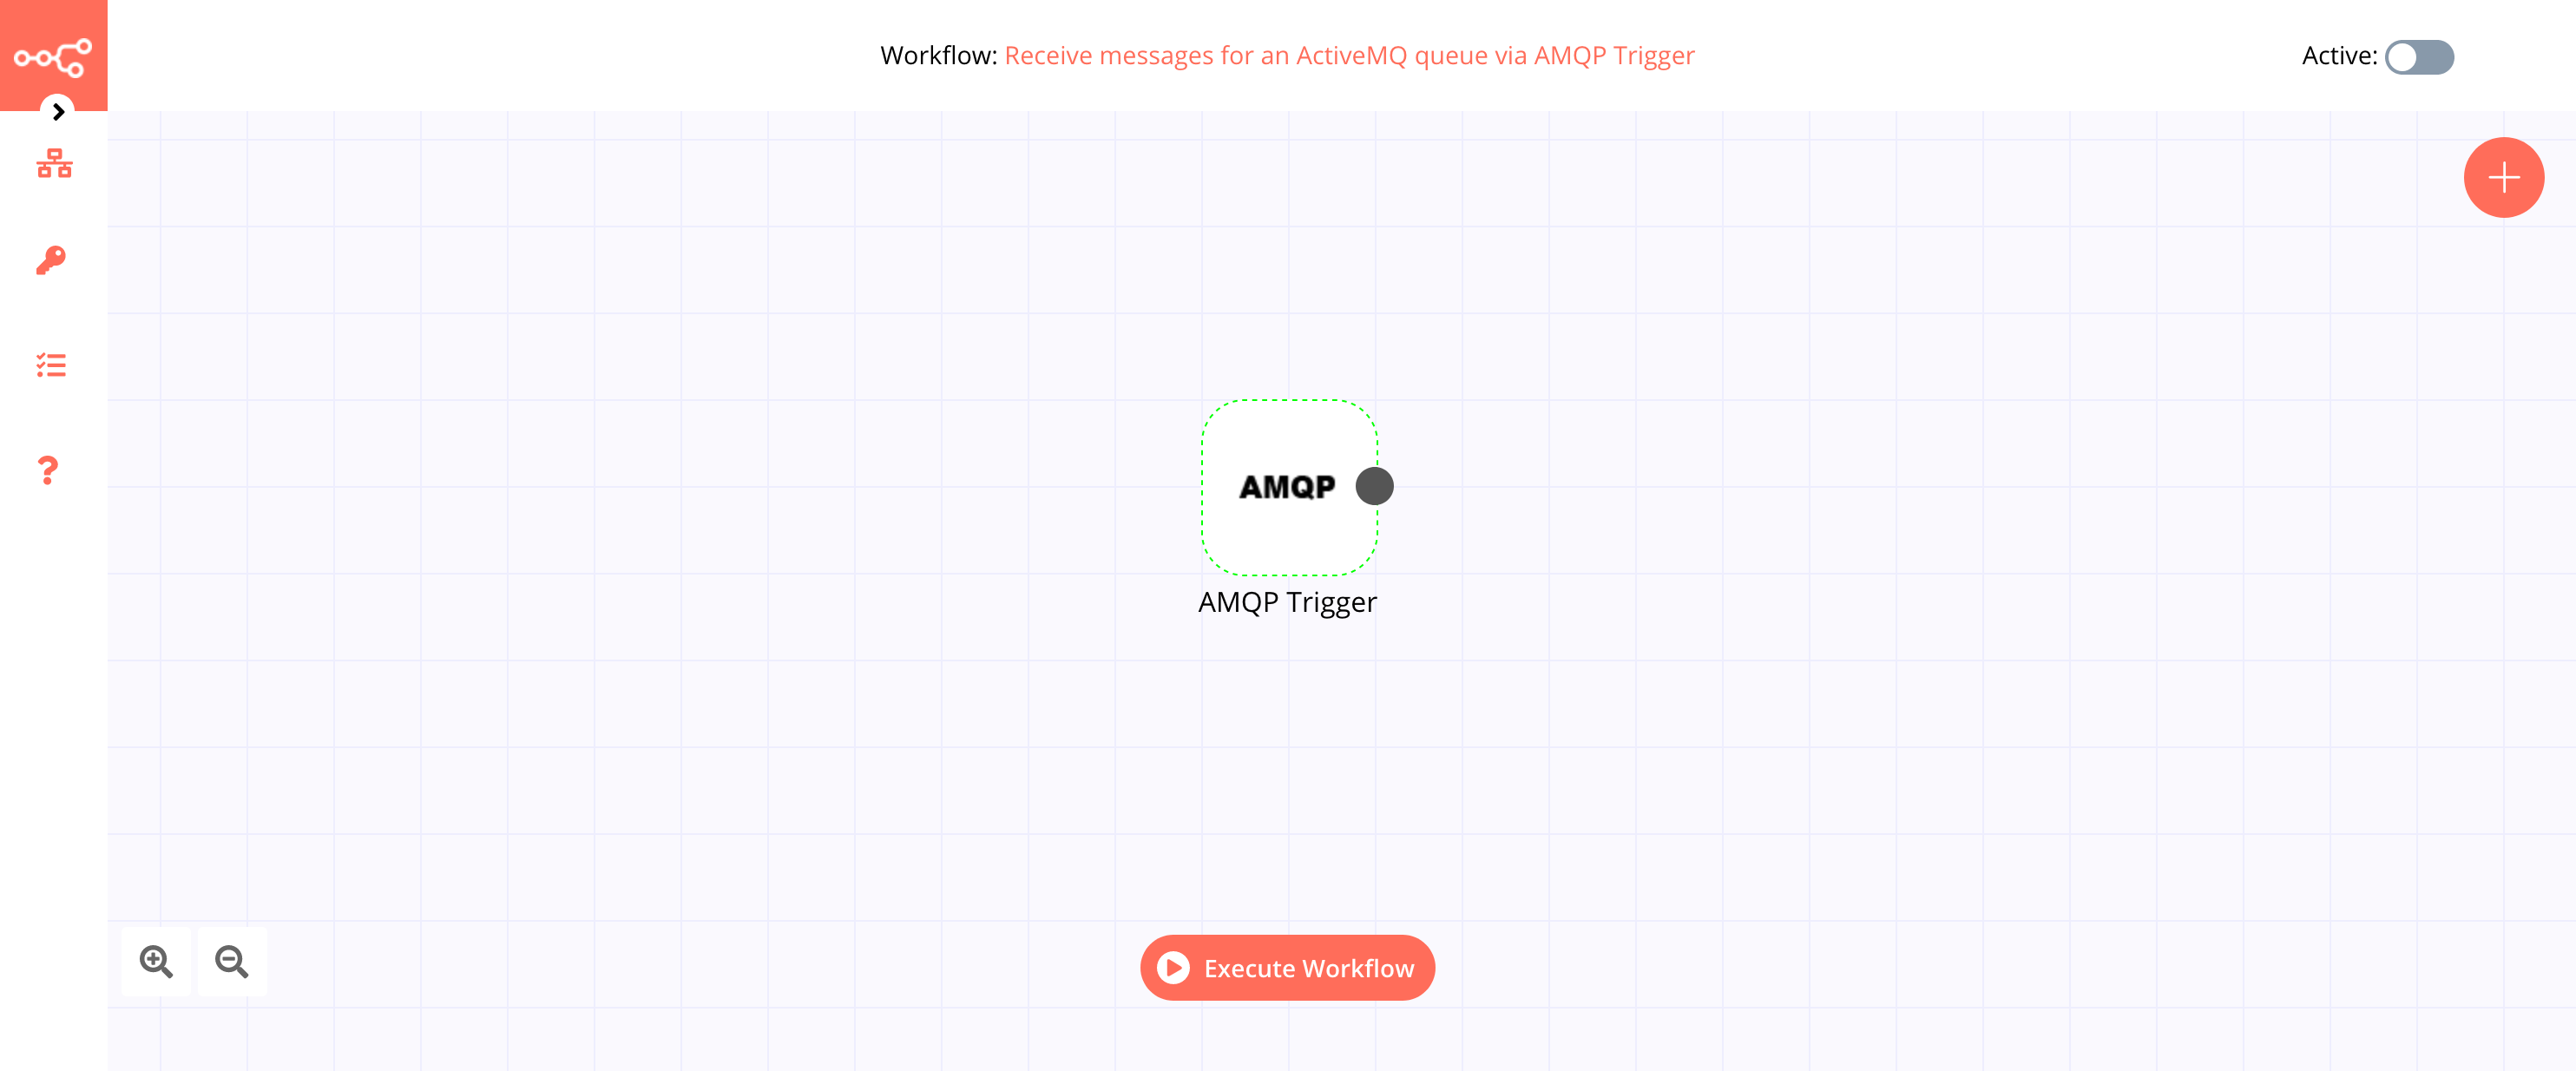 A workflow with the AMQP Trigger node